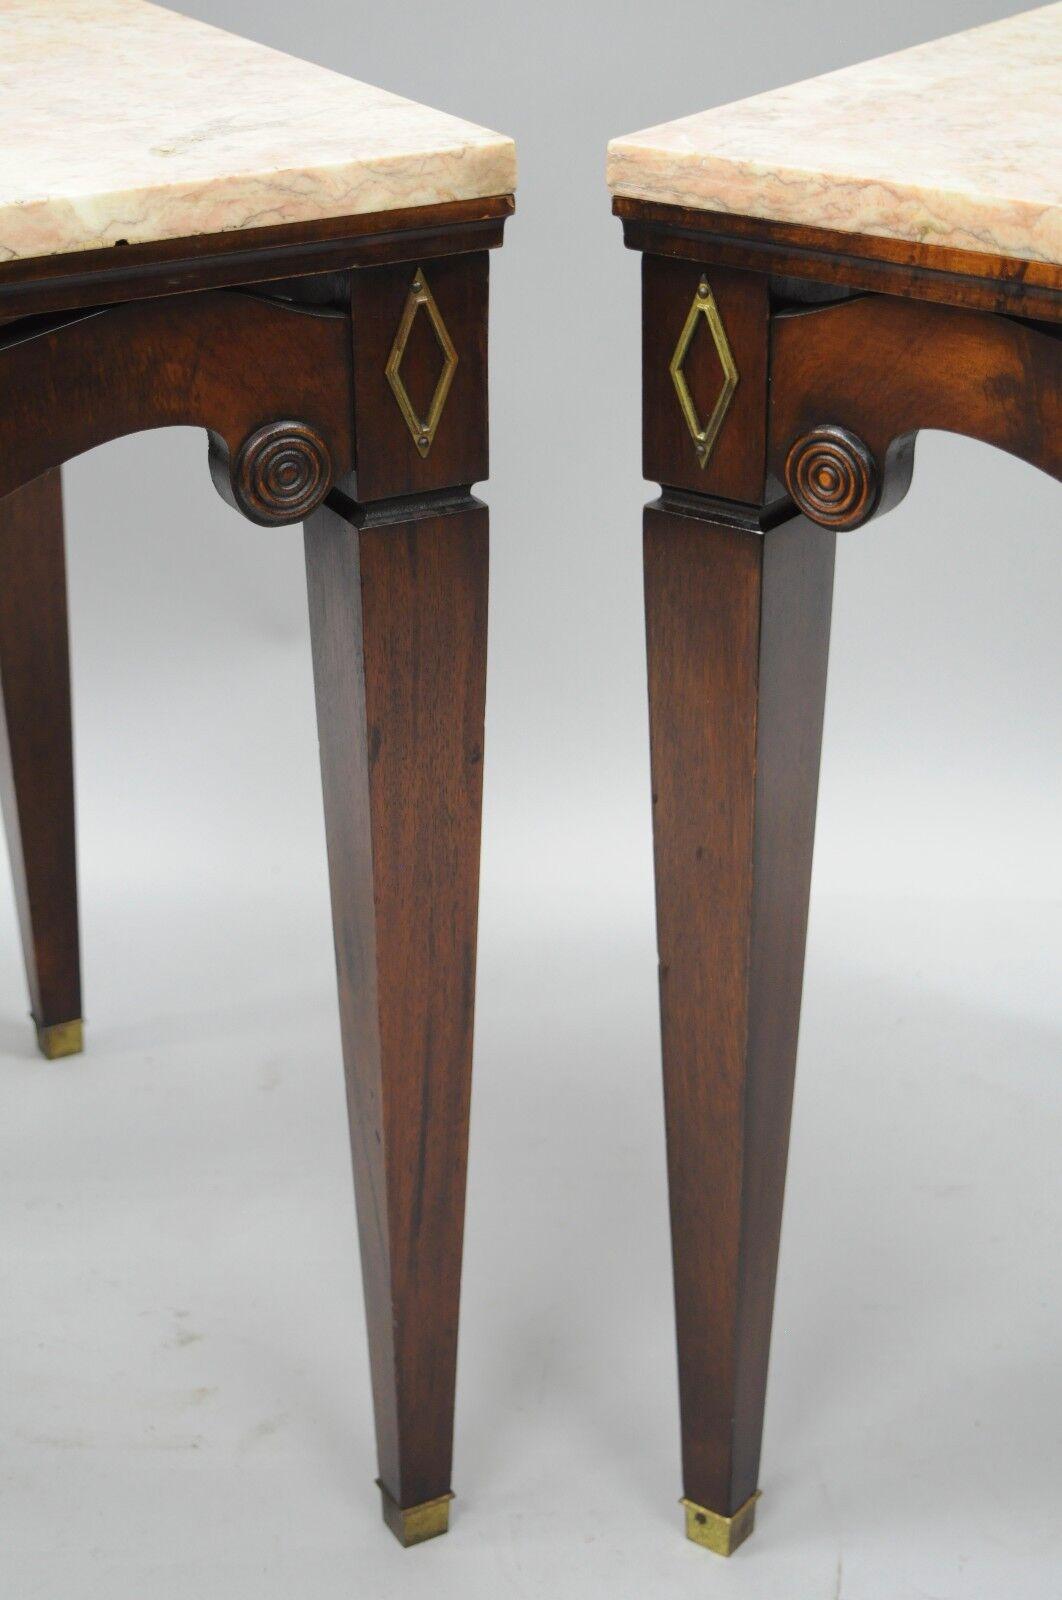 American Pair of Antique Pink Marble-Top Mahogany End Tables Regency Square Weiman Era For Sale